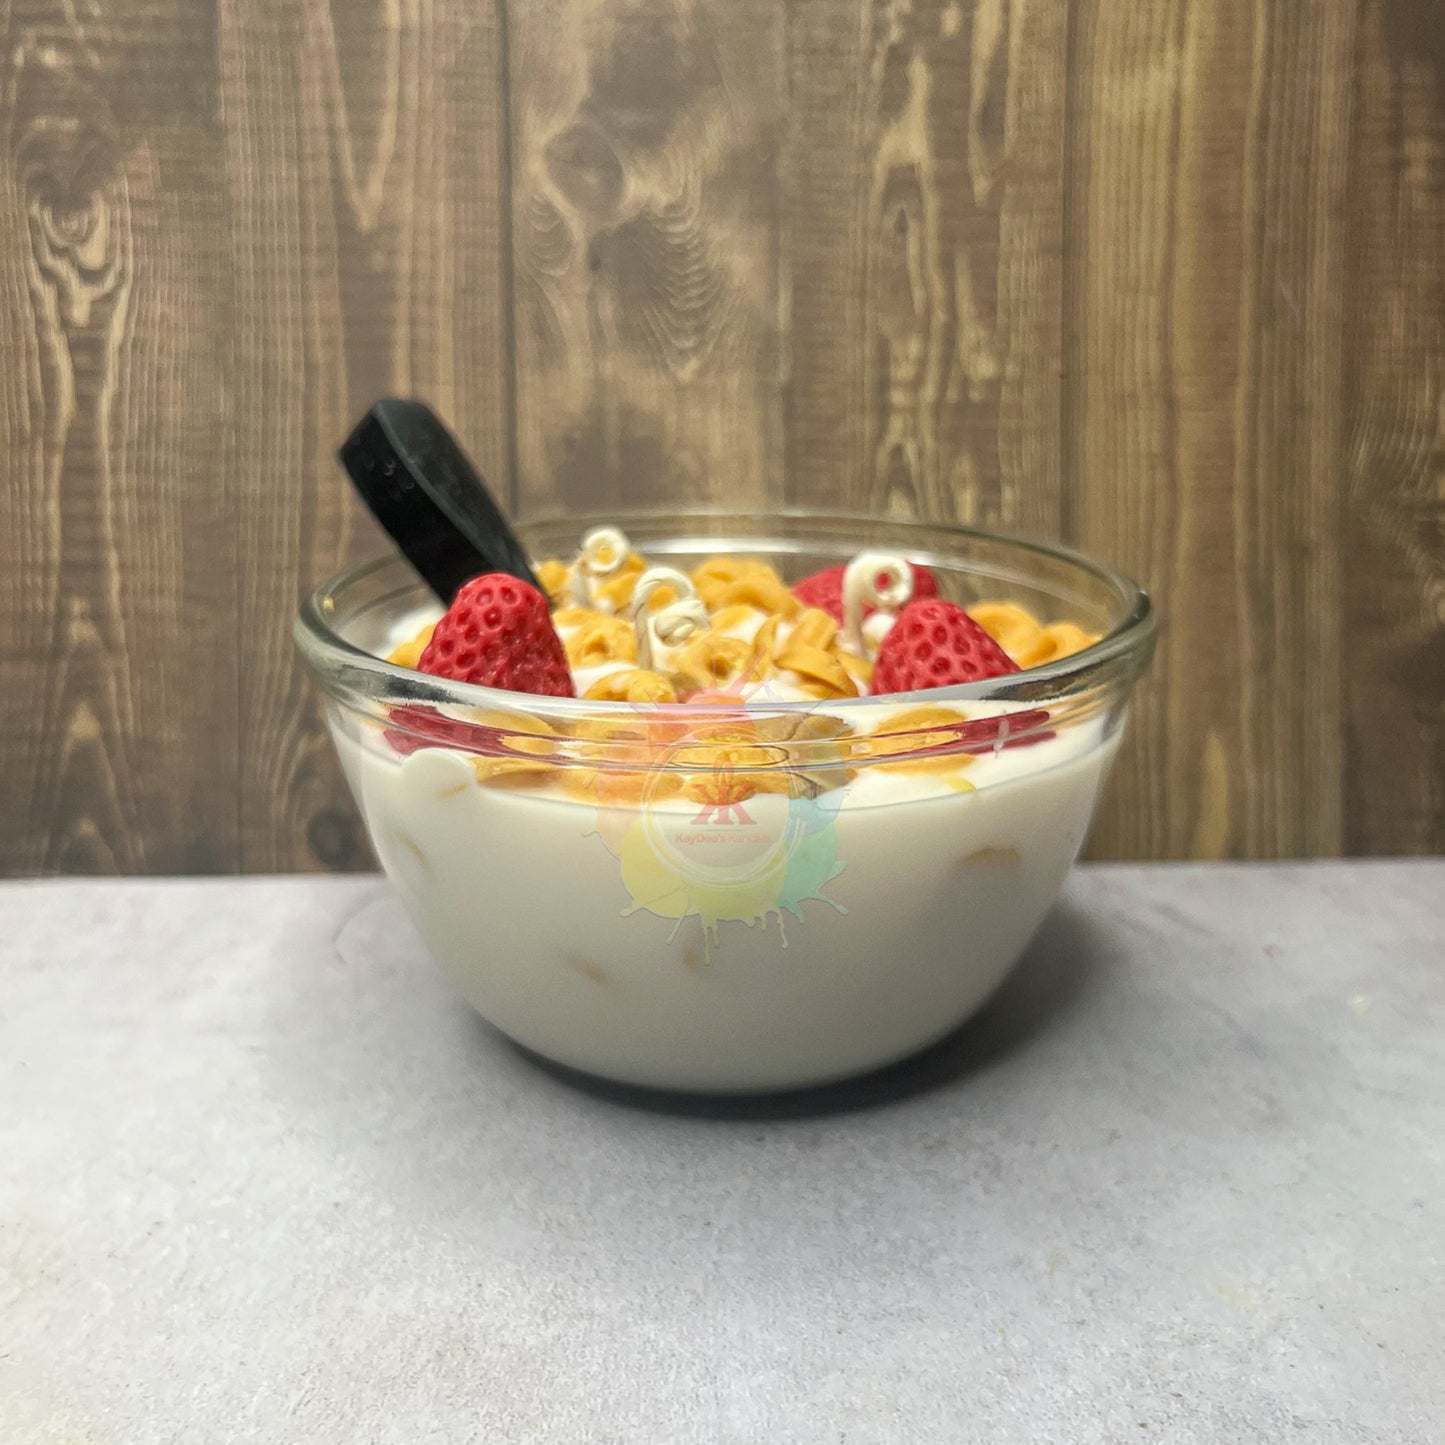 Photo of bowl of cereal. Cheerios and Strawberry candle made to mimic real bowl of cereal.